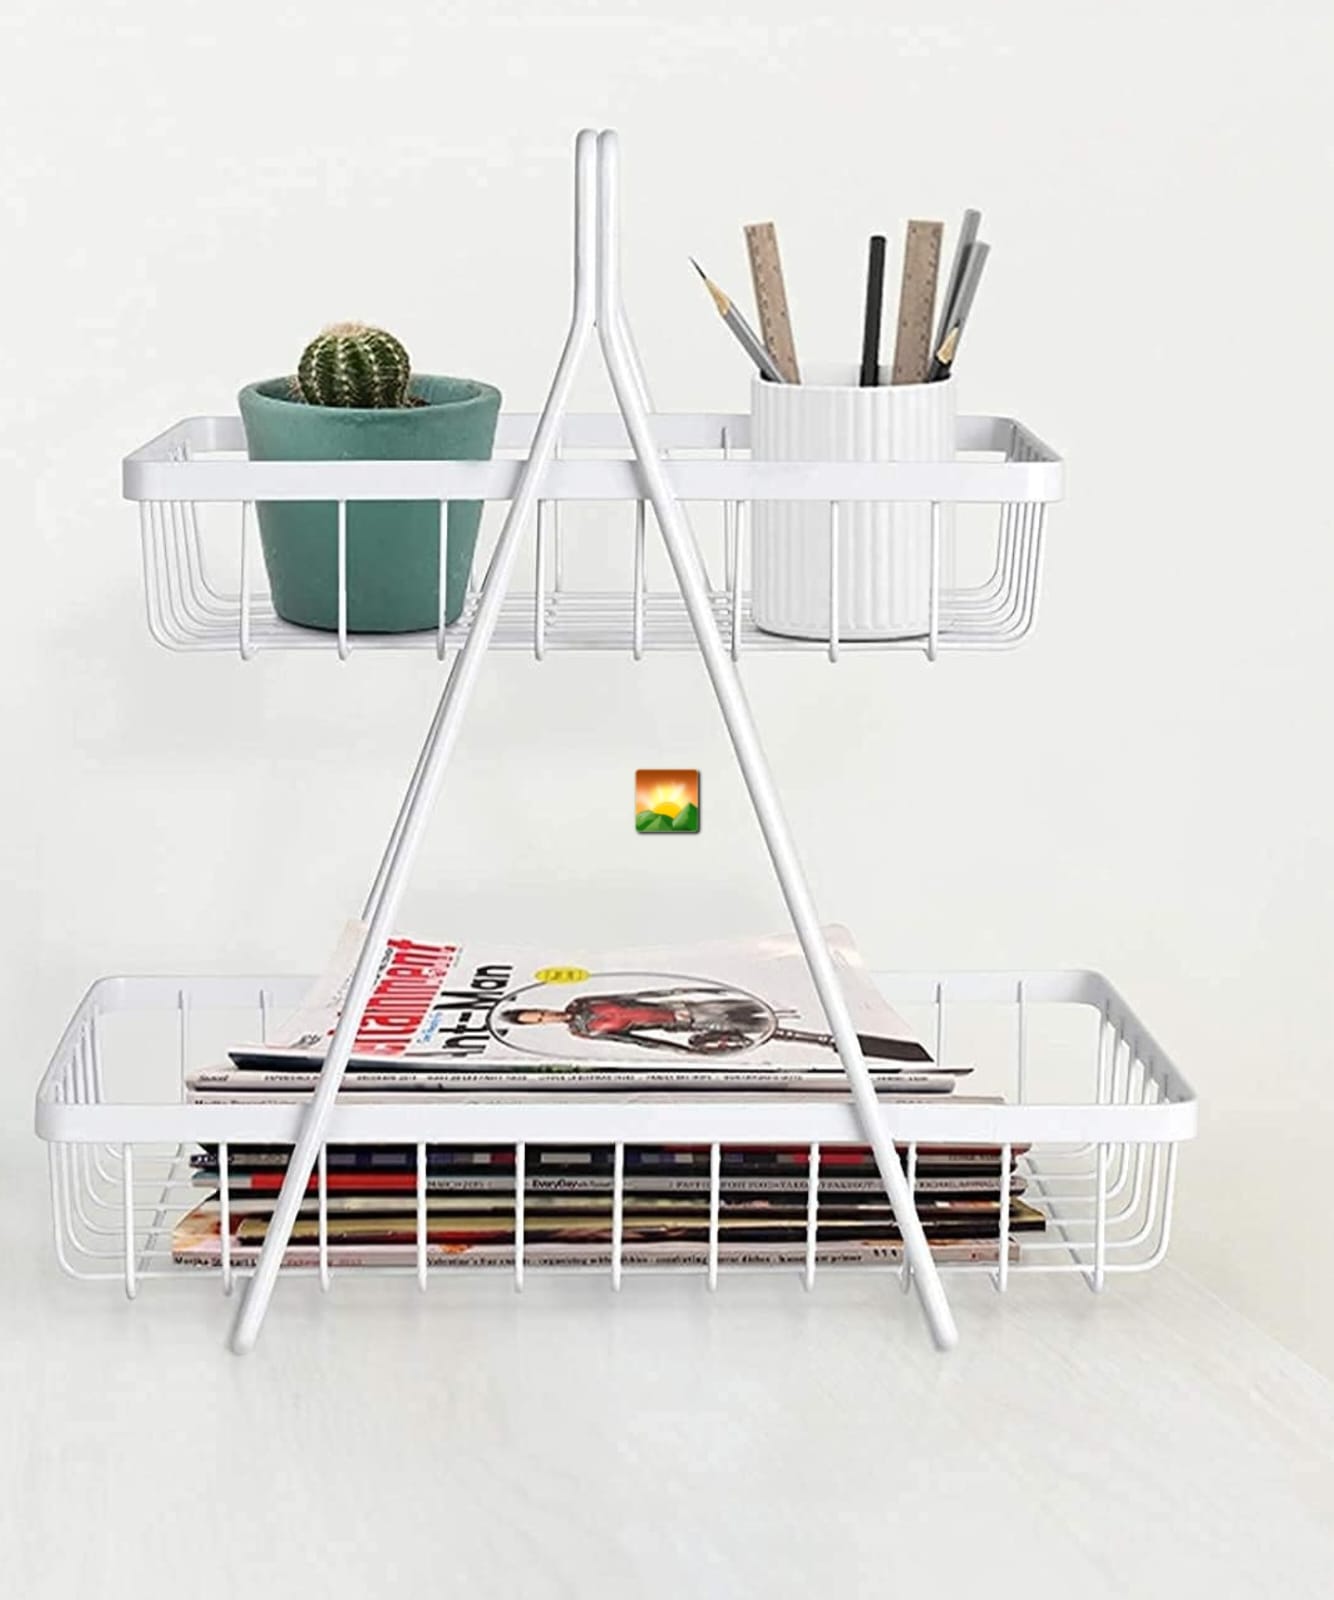 Organiser Basket Say goodbye to clutter and hello to a beautifully organized living space!"